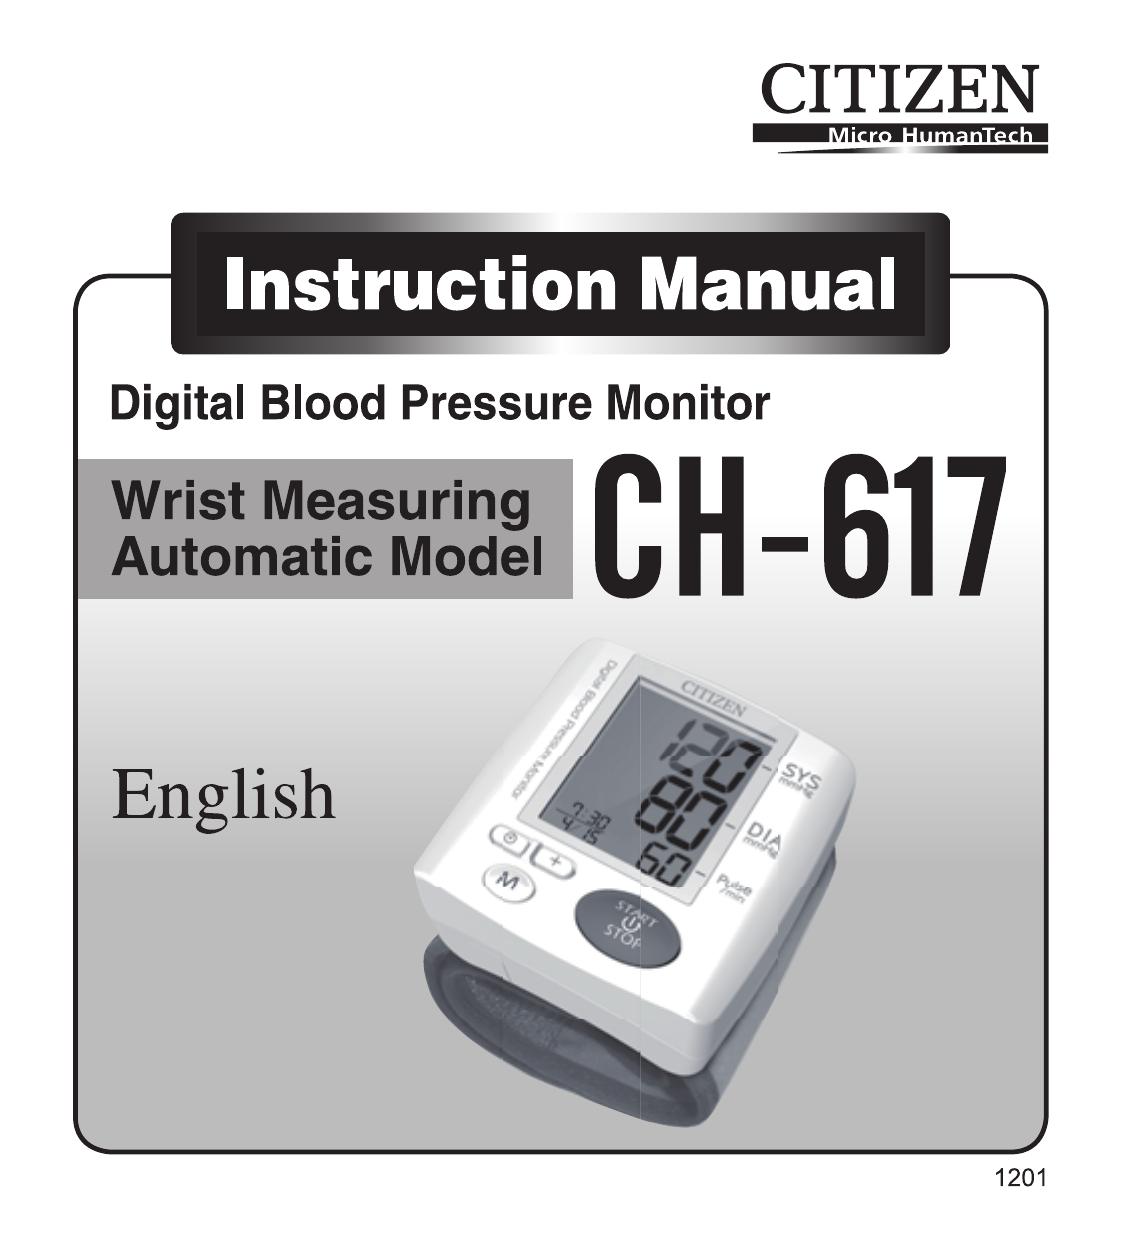 Citizen ch-17 Blood Glucose Meter User Manual (Page 1)